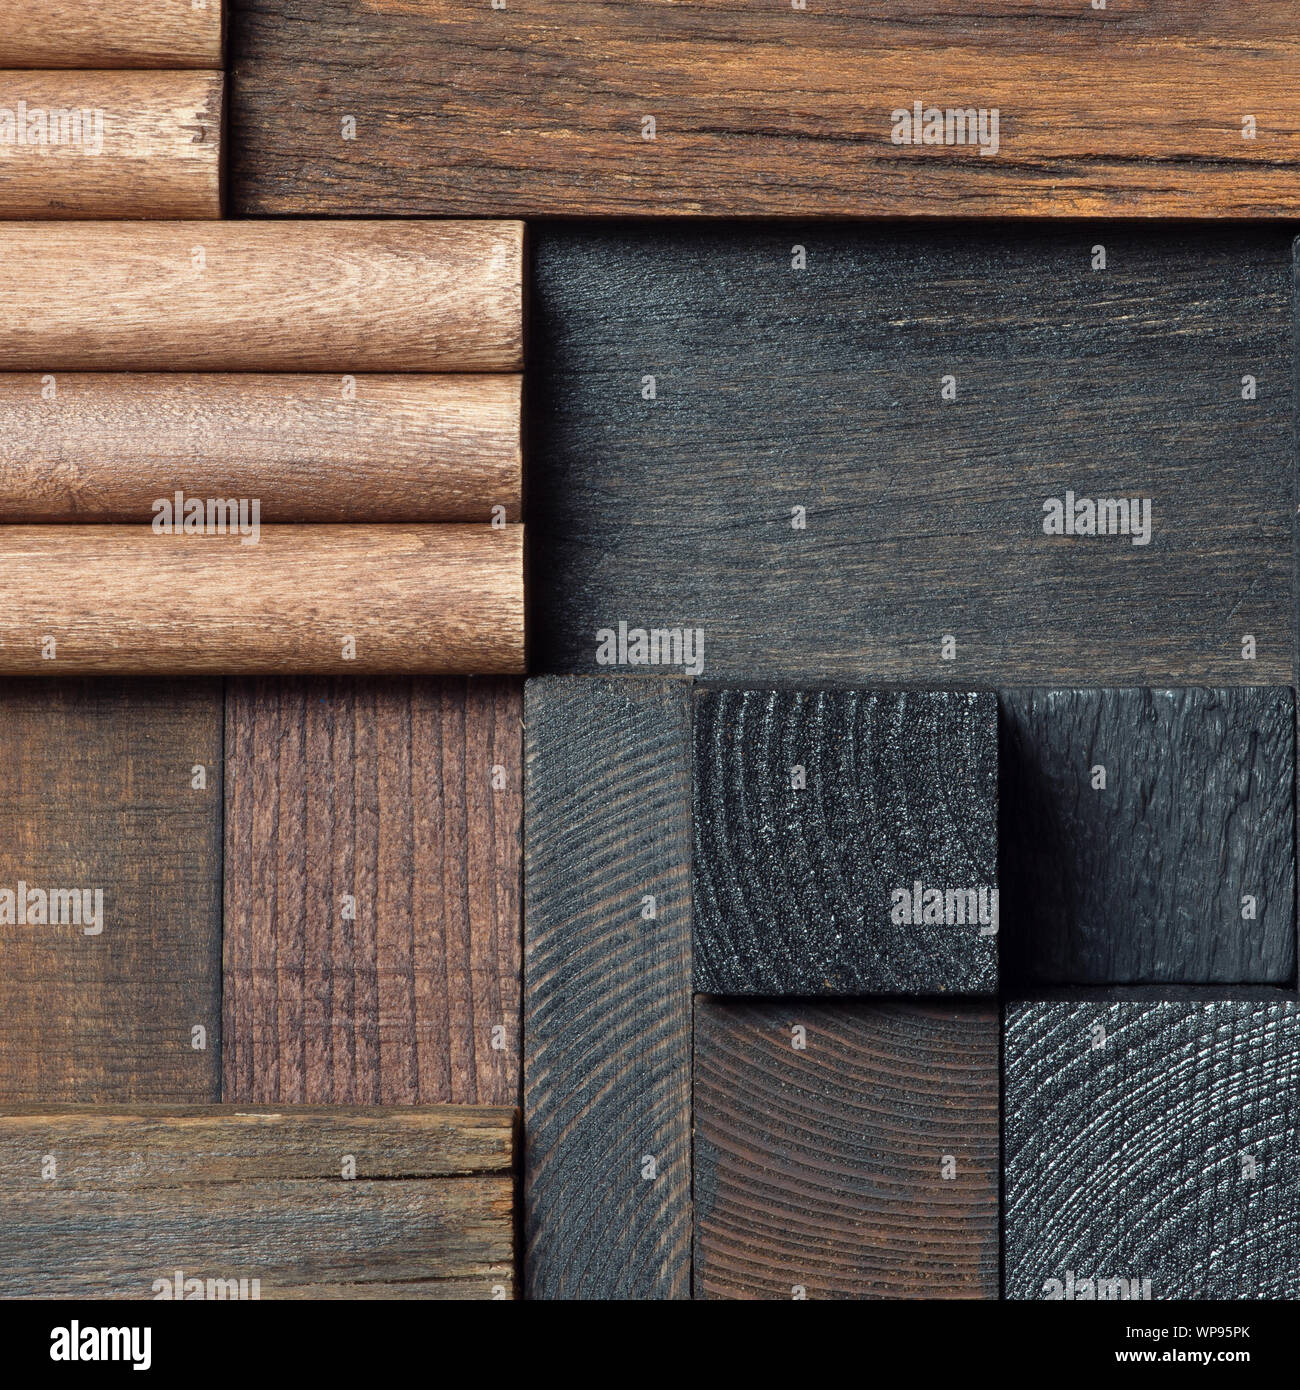 Abstract dark wood block collage background. Stock Photo